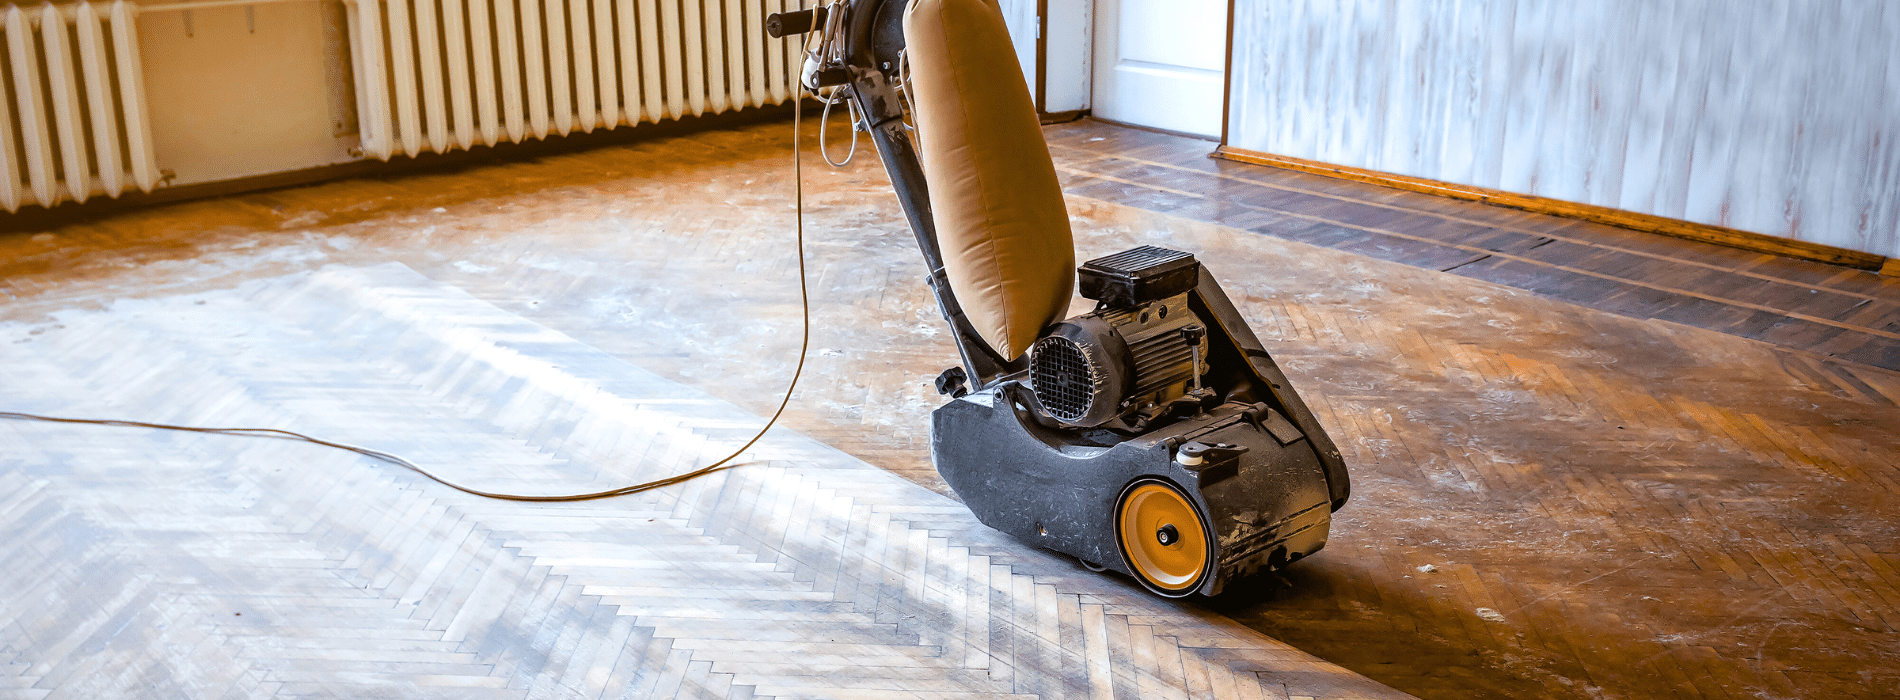 Experience flawless hardwood floor sanding with Mr Sander® using the Bona Scorpion. This state-of-the-art 200mm drum sander (1.5 kW, 240V, 50Hz) is seamlessly connected to a highly efficient HEPA-filtered dust extraction system, ensuring a clean and efficient results.